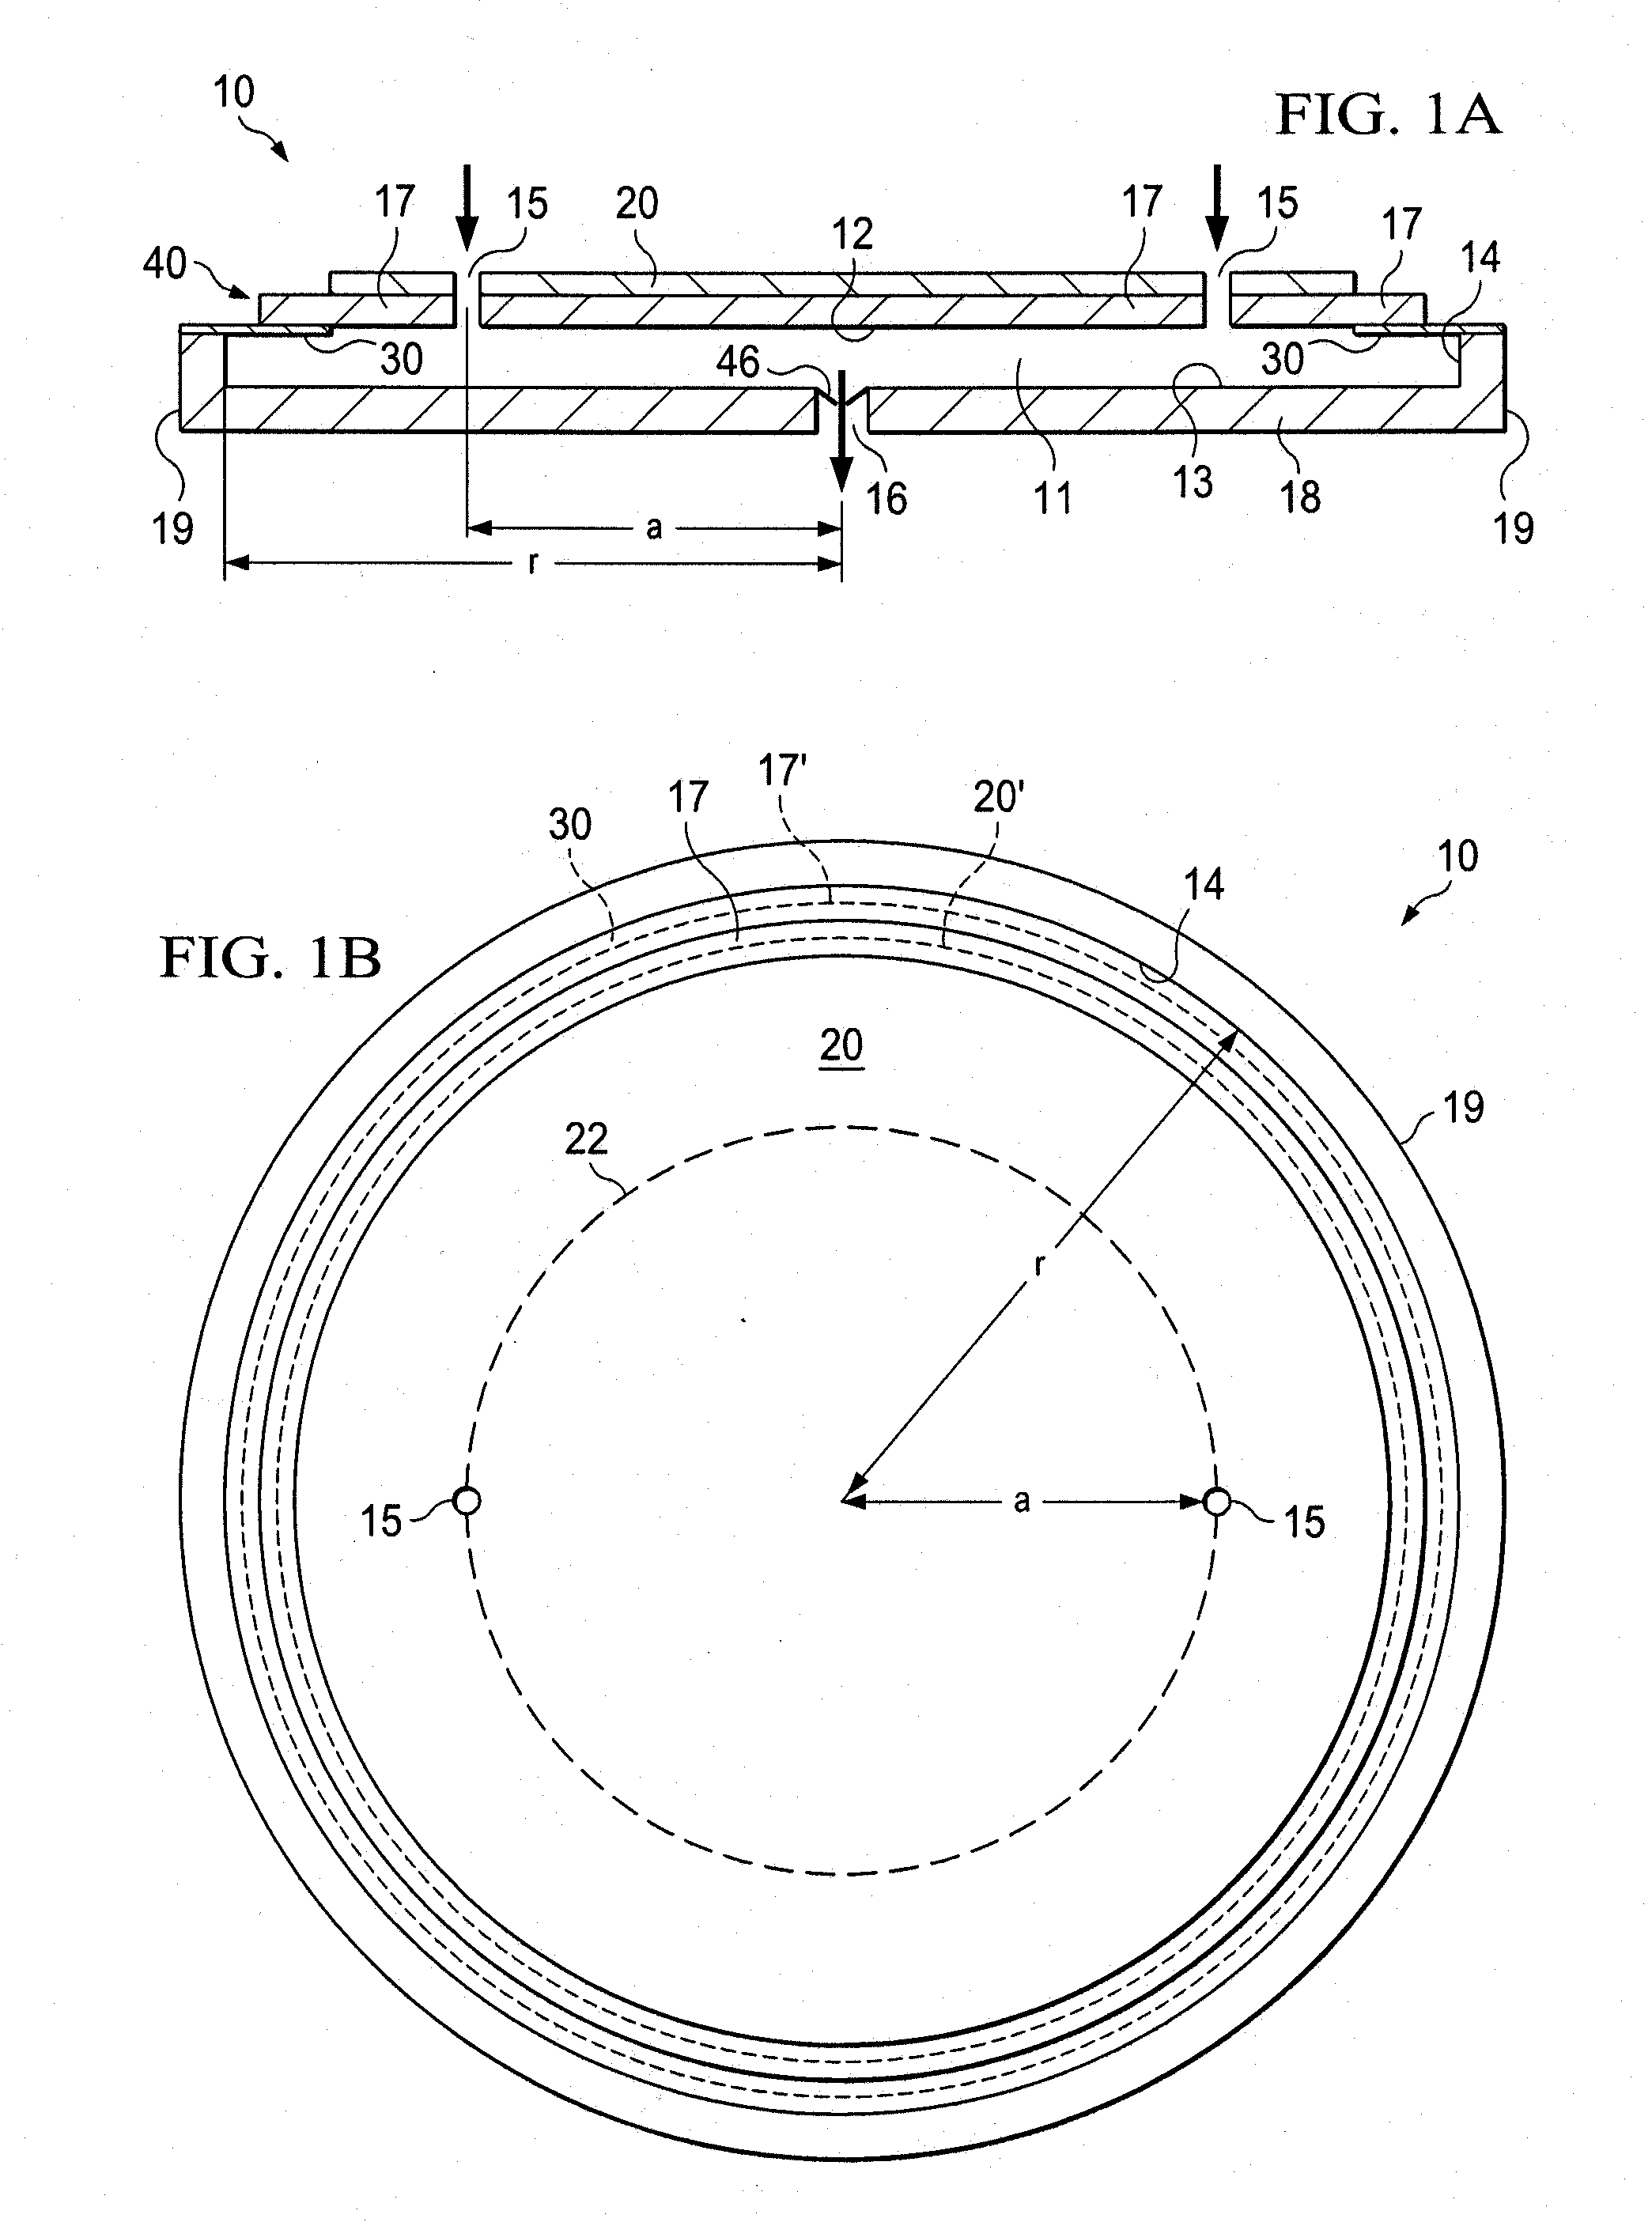 Fluid disc pump with square-wave driver